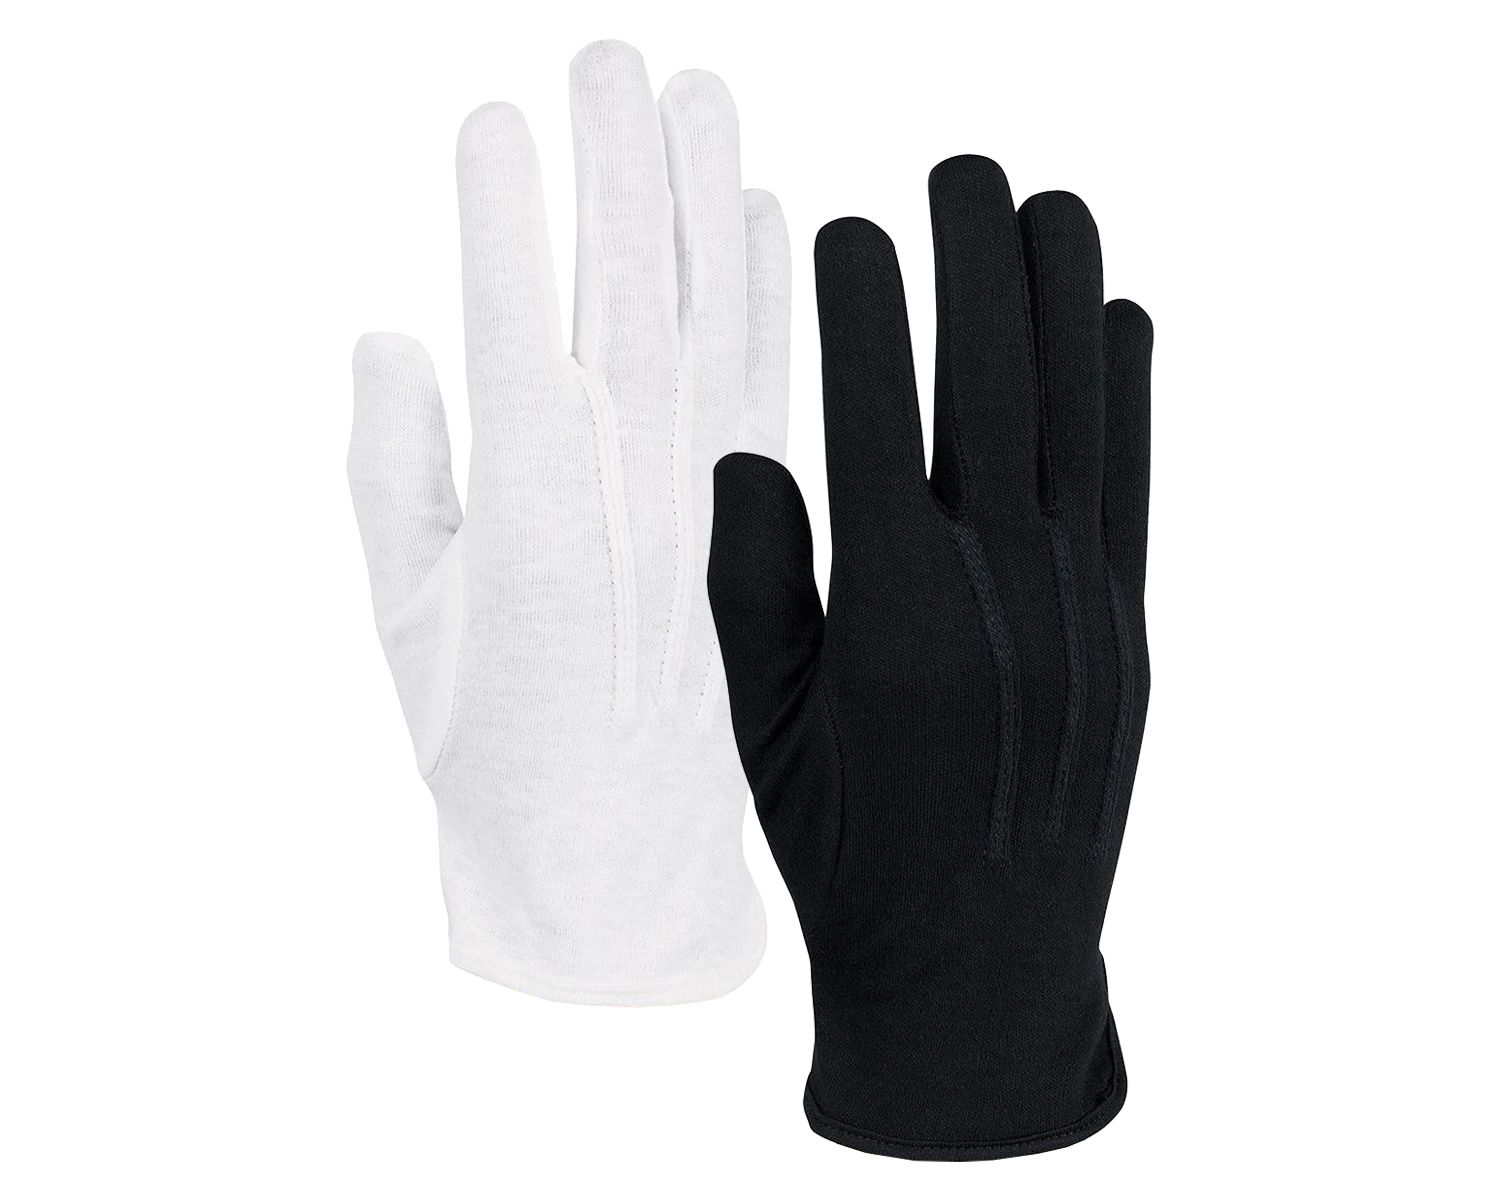 Marching Band Gloves: A Comprehensive Review